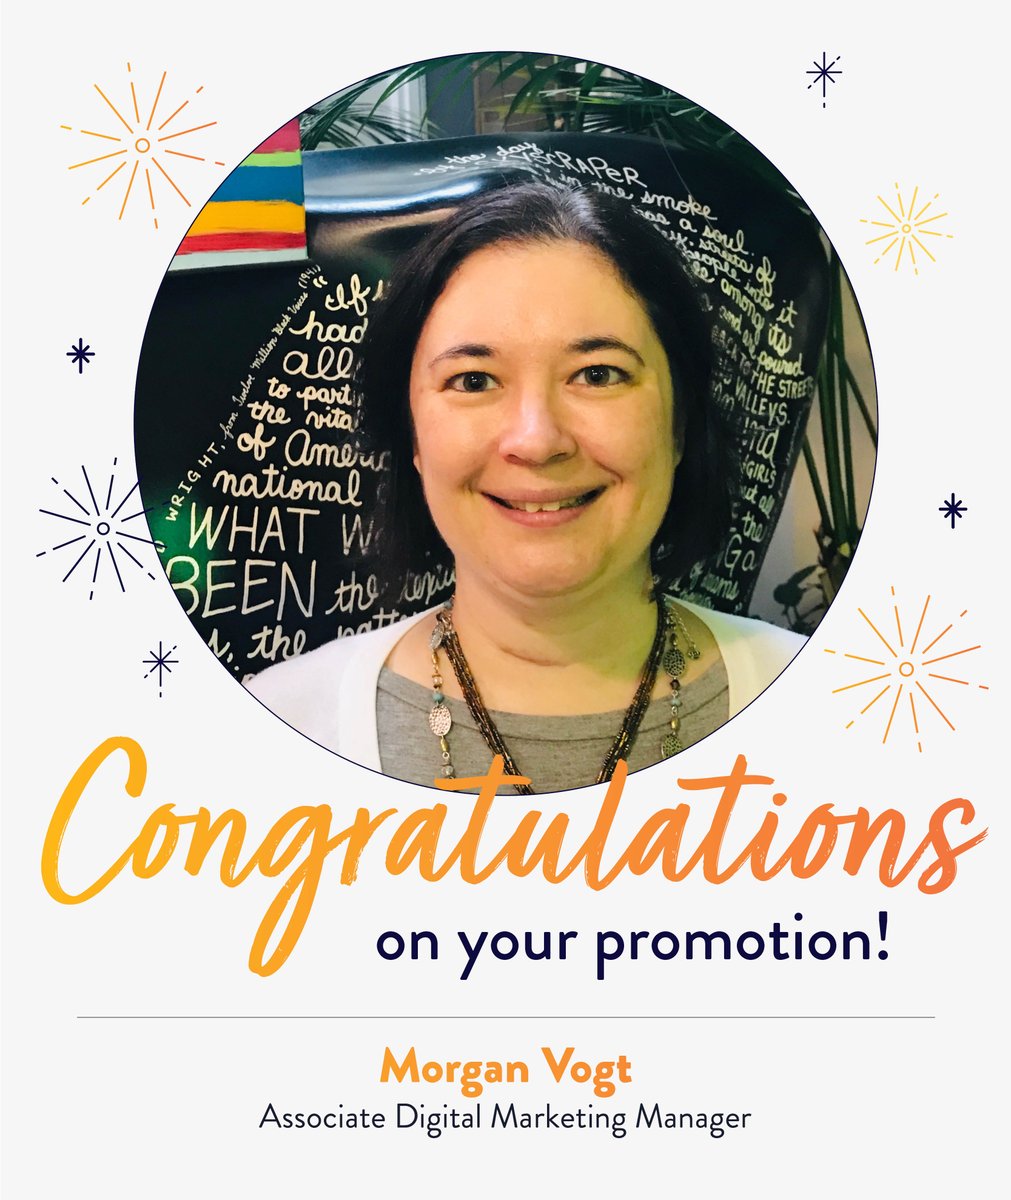 📣 Morgan Vogt has been promoted to Associate Digital Marketing Manager! 🎈 She's such a vital part of our team, building a strong email marketing program and driving website projects among many other things. Congrats Morgan, we can't wait to see how you grow in this role!